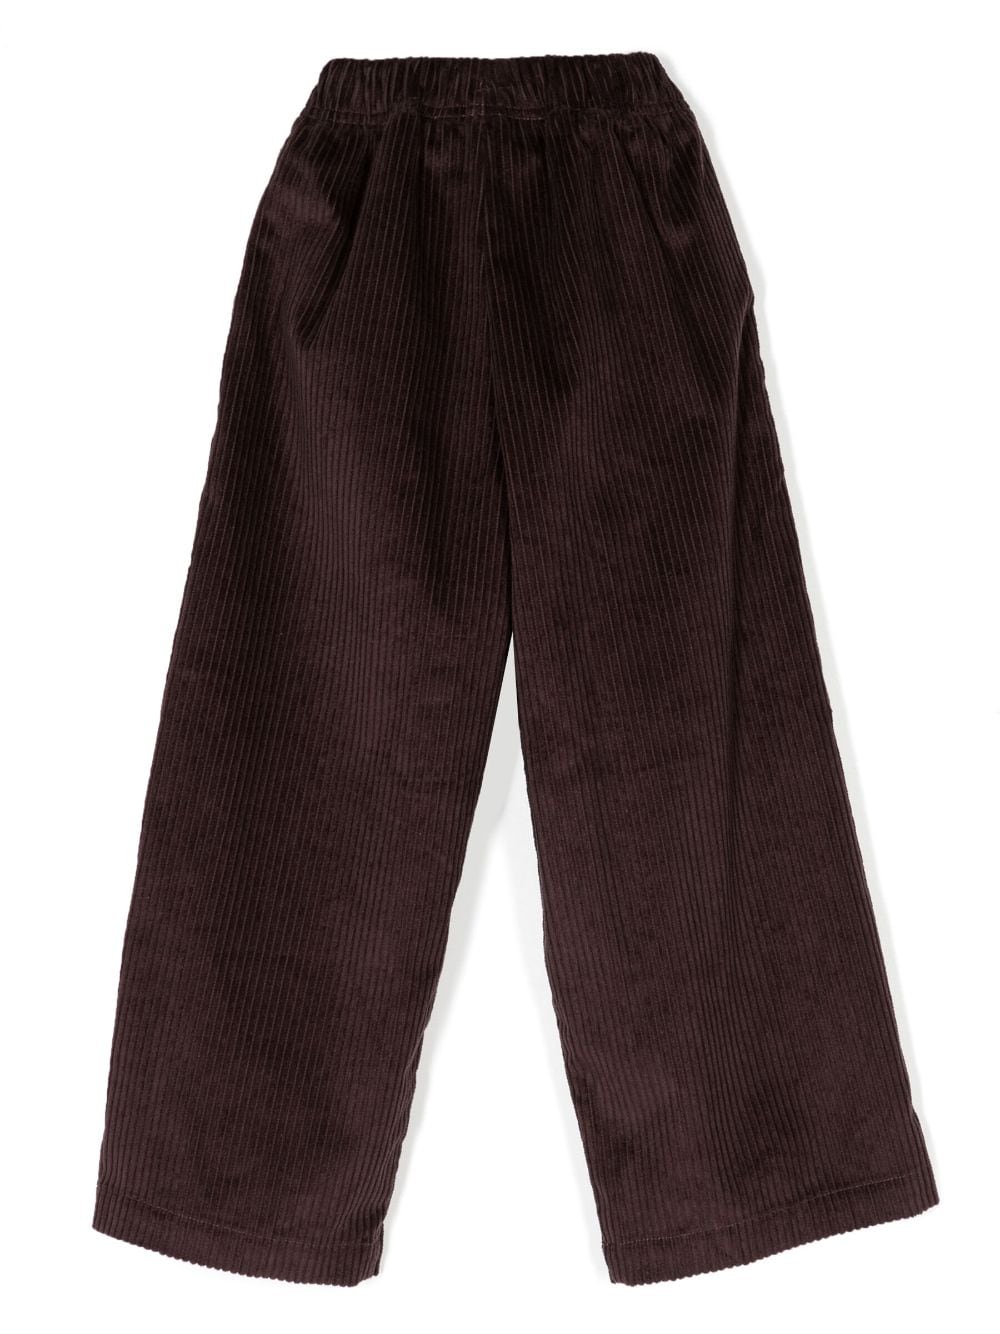 Classic Mens Corduroy Trousers  Needlecord  Fine Cord Trousers US